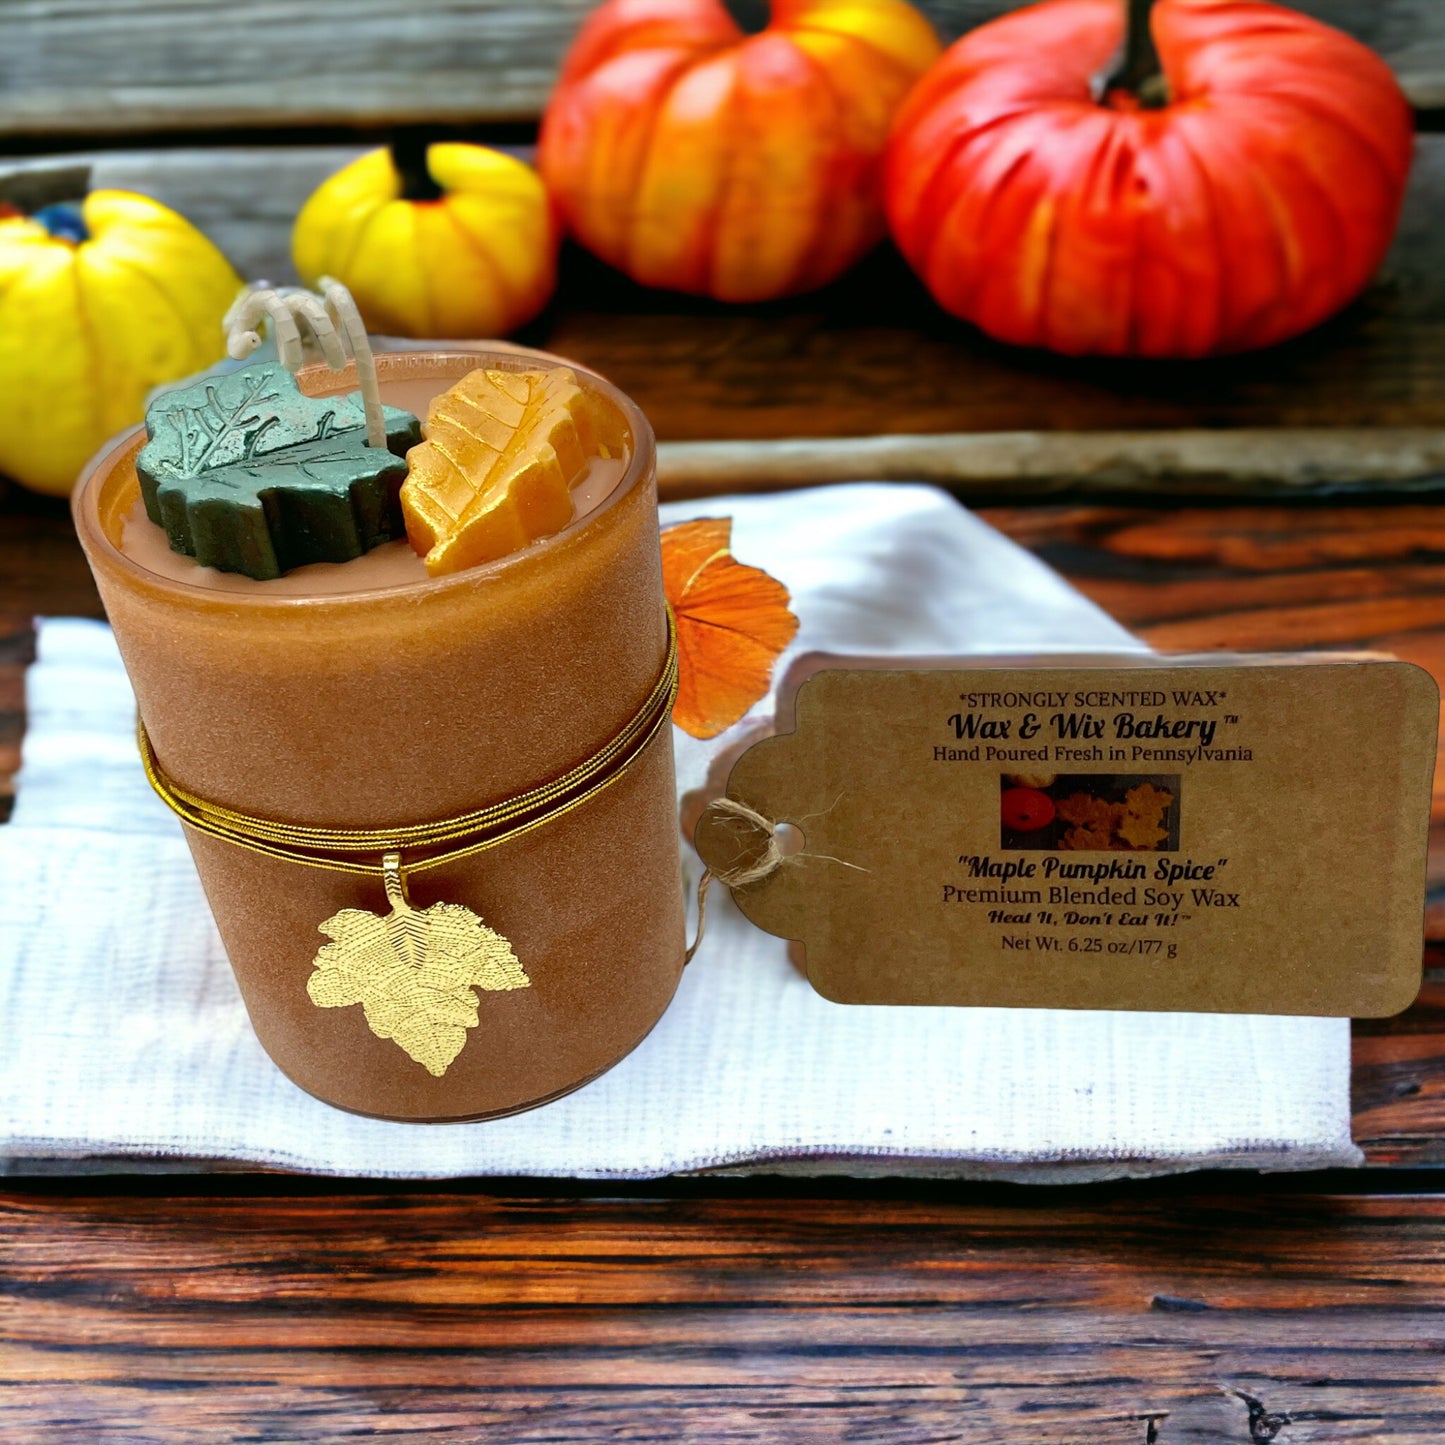 Maple Pumpkin Spice Candle/Soy Candle/6.25oz./Fall Leaves/Strongly Scented Soy Candle/Holiday Candle/Fall Candle/Gift Candle/Home Decor